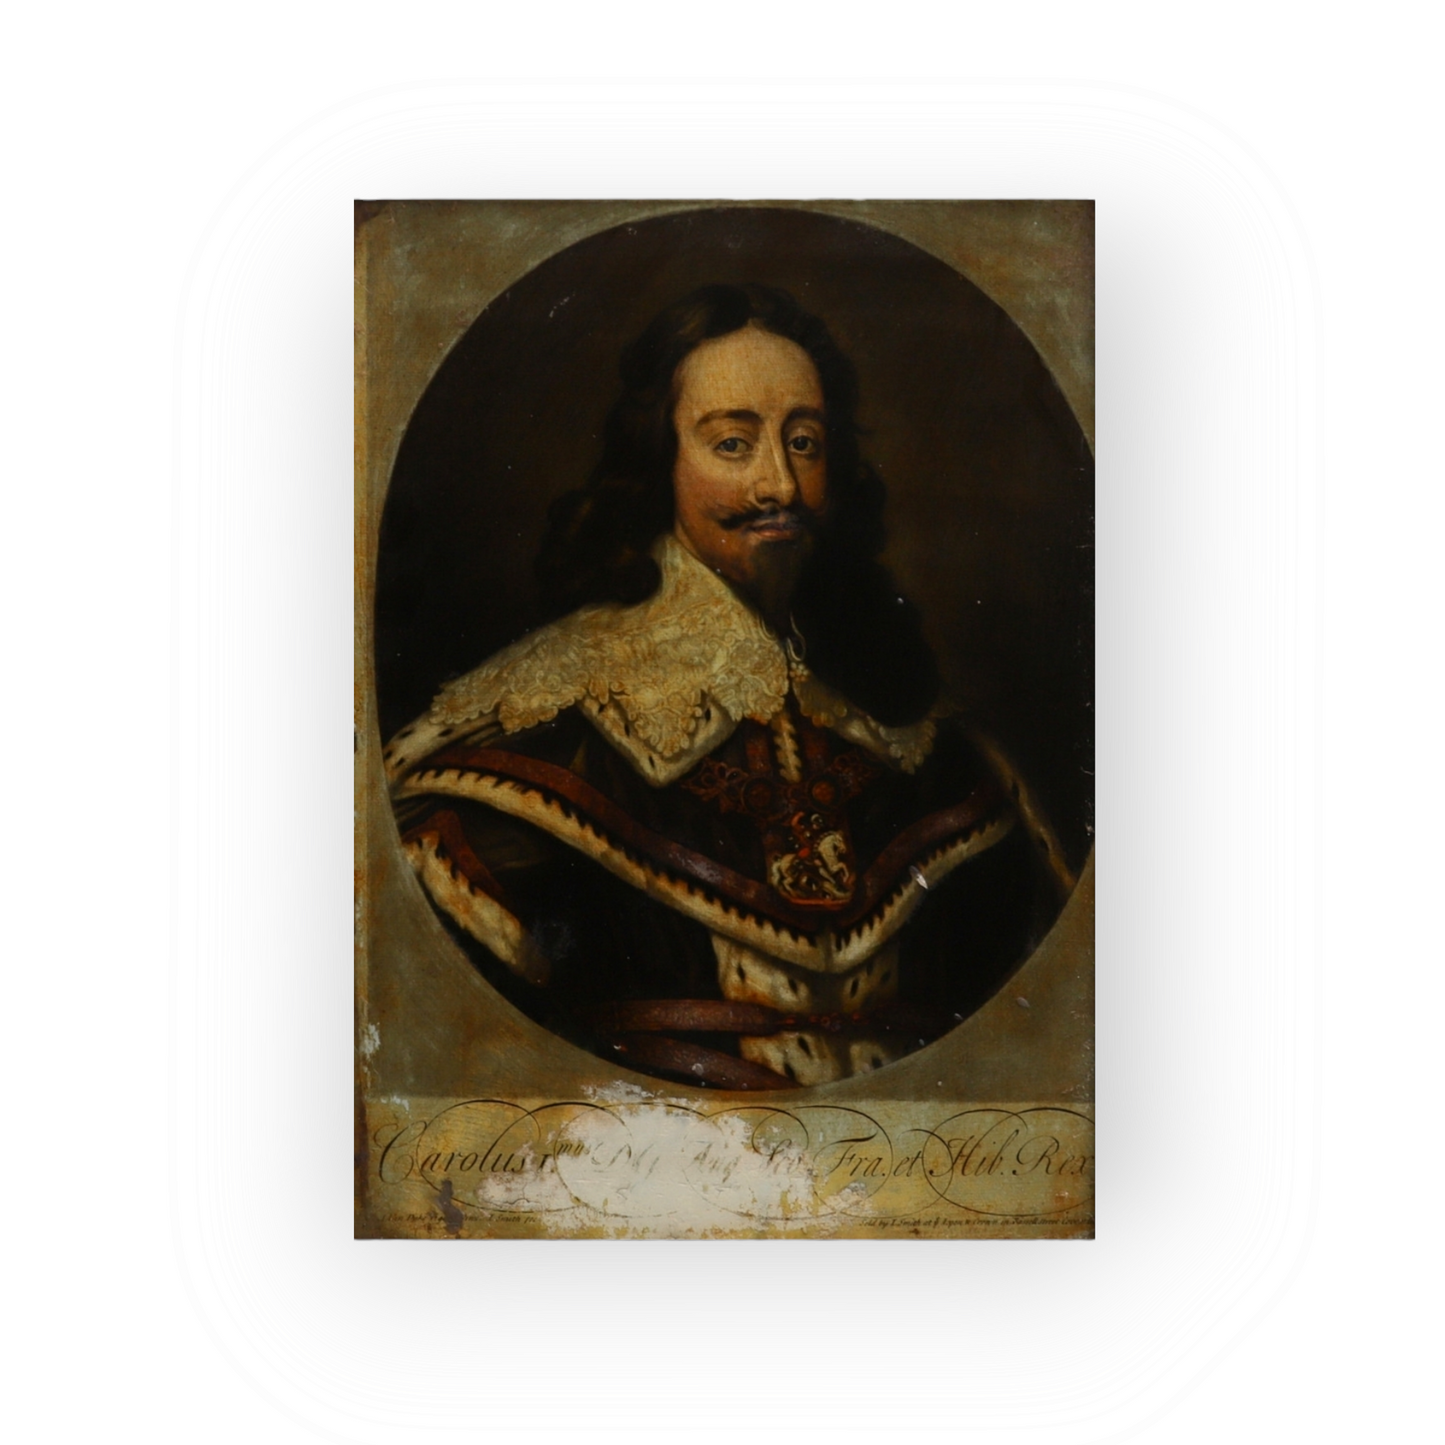 Early 18th Century English Antique Reverse Print On Glass of King Charles I, (1600-1649)